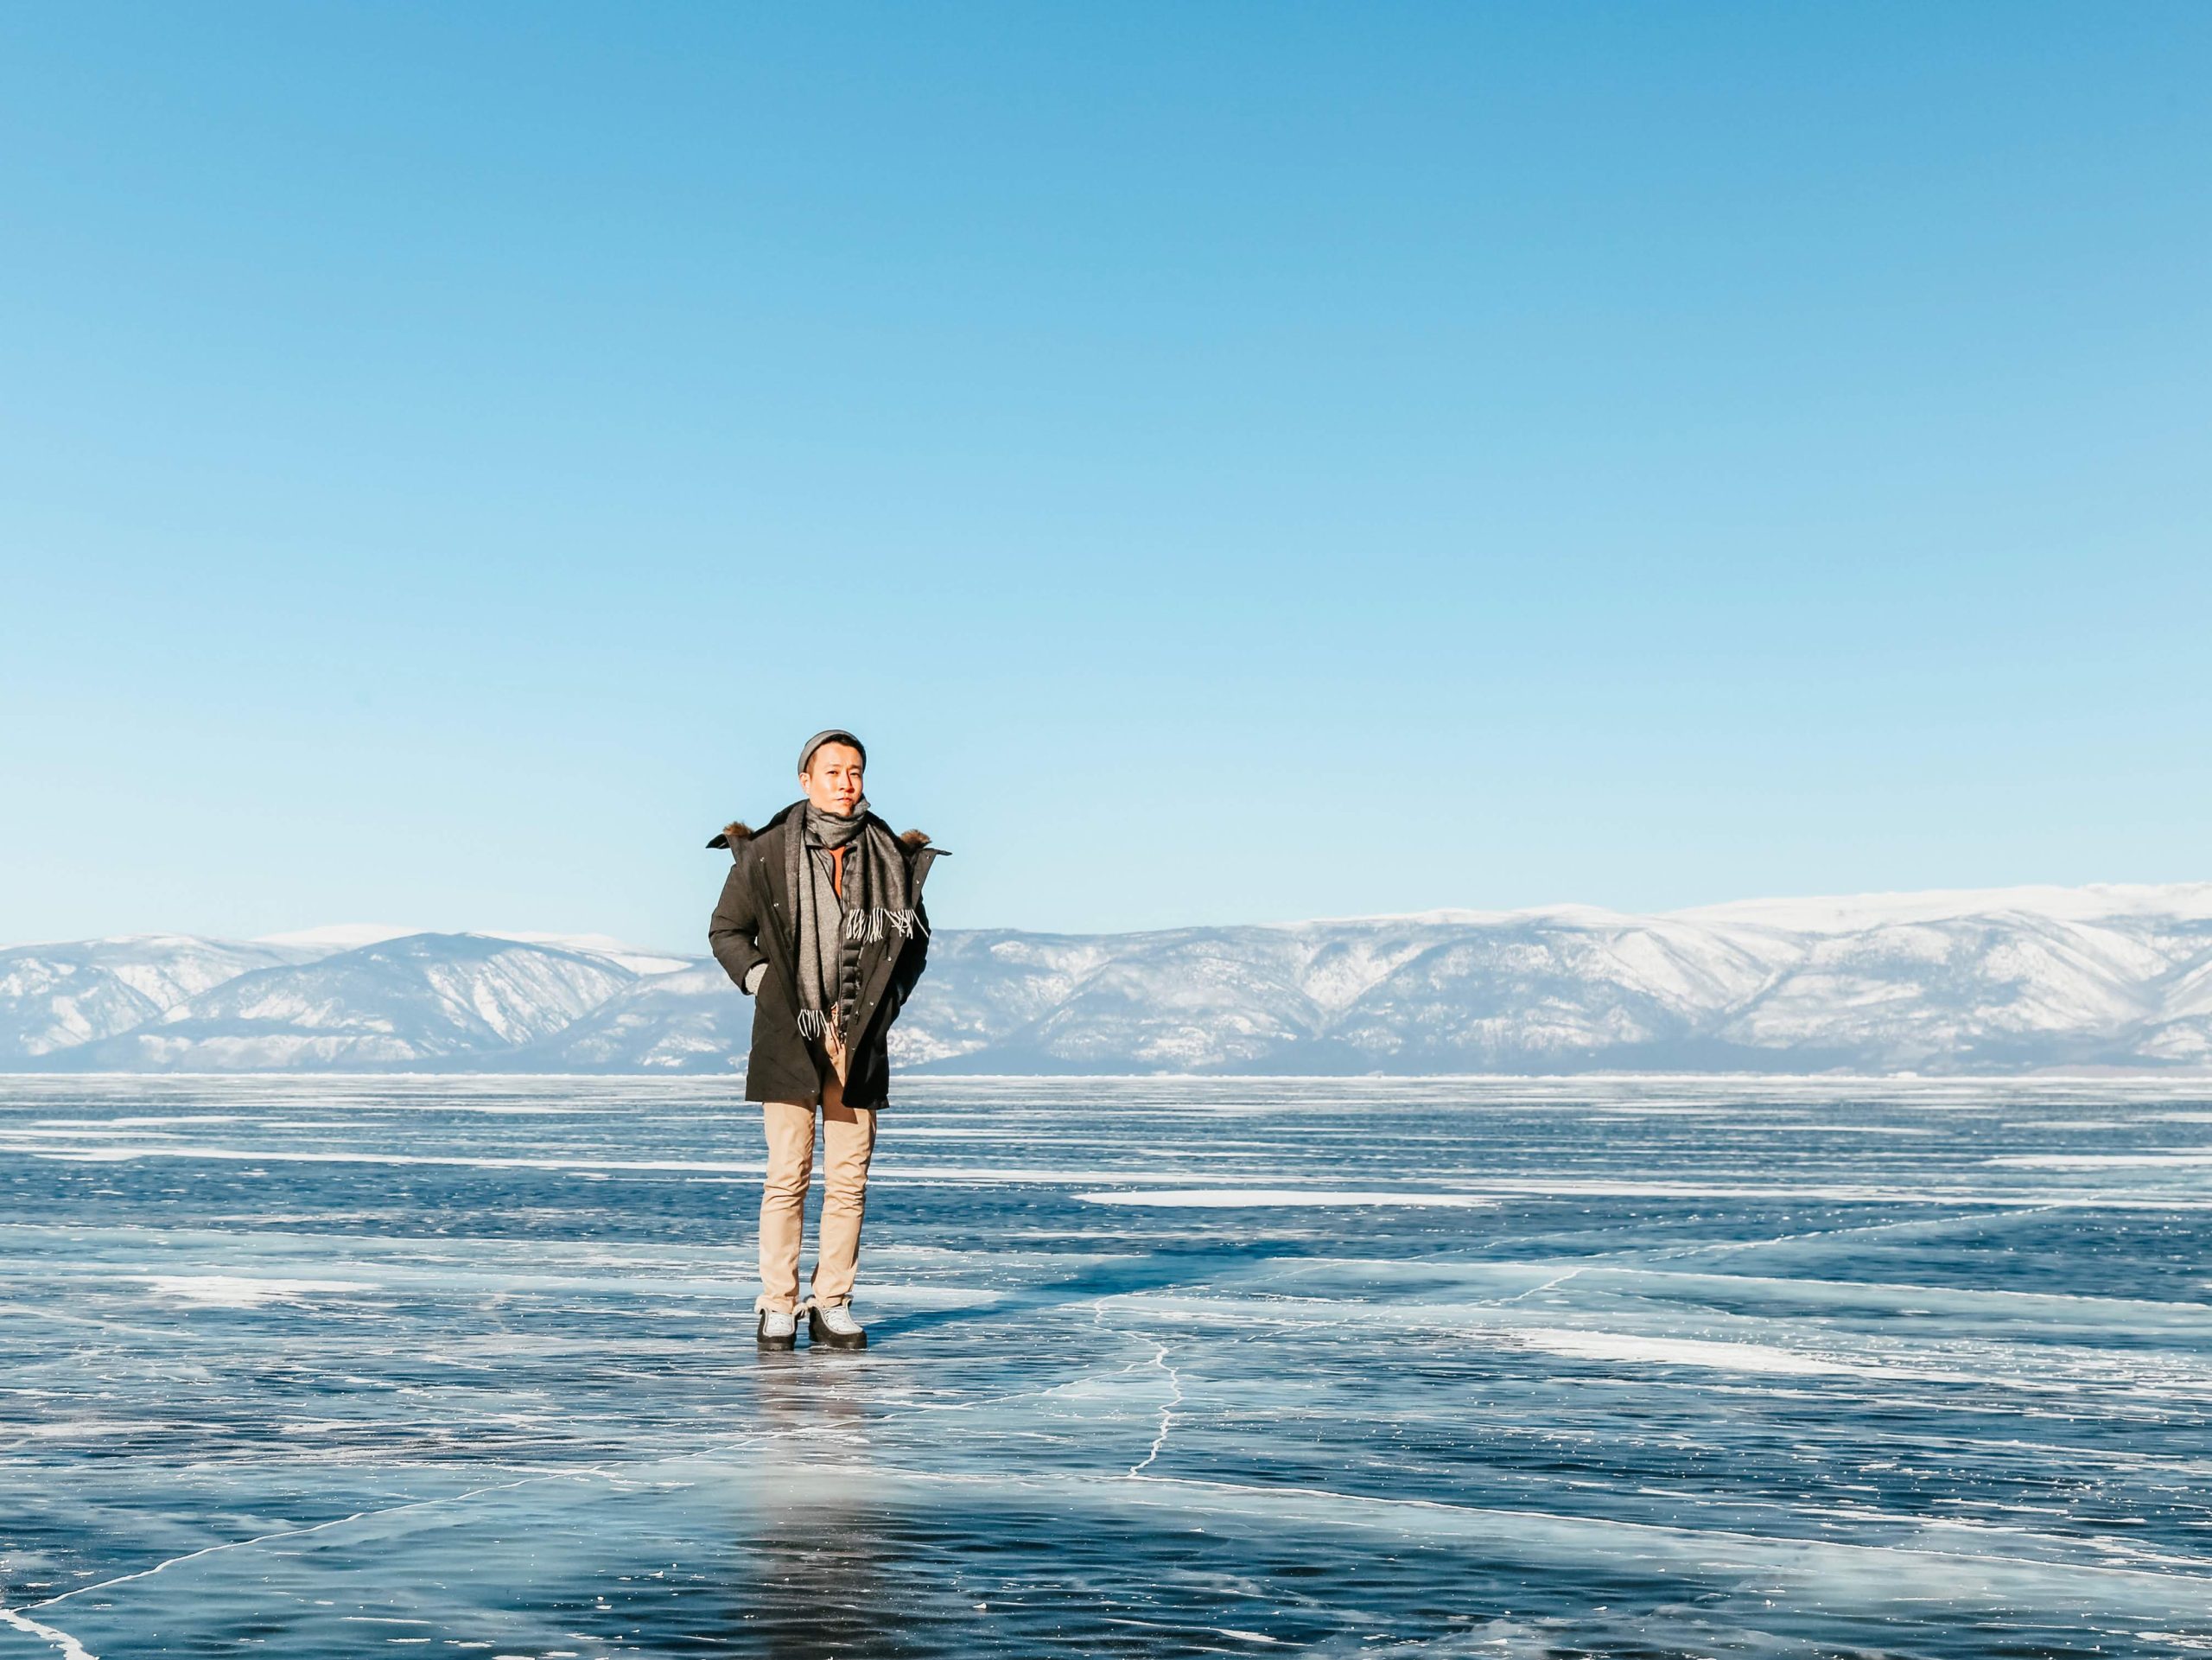 Standing on the frozen lake in South Baikal